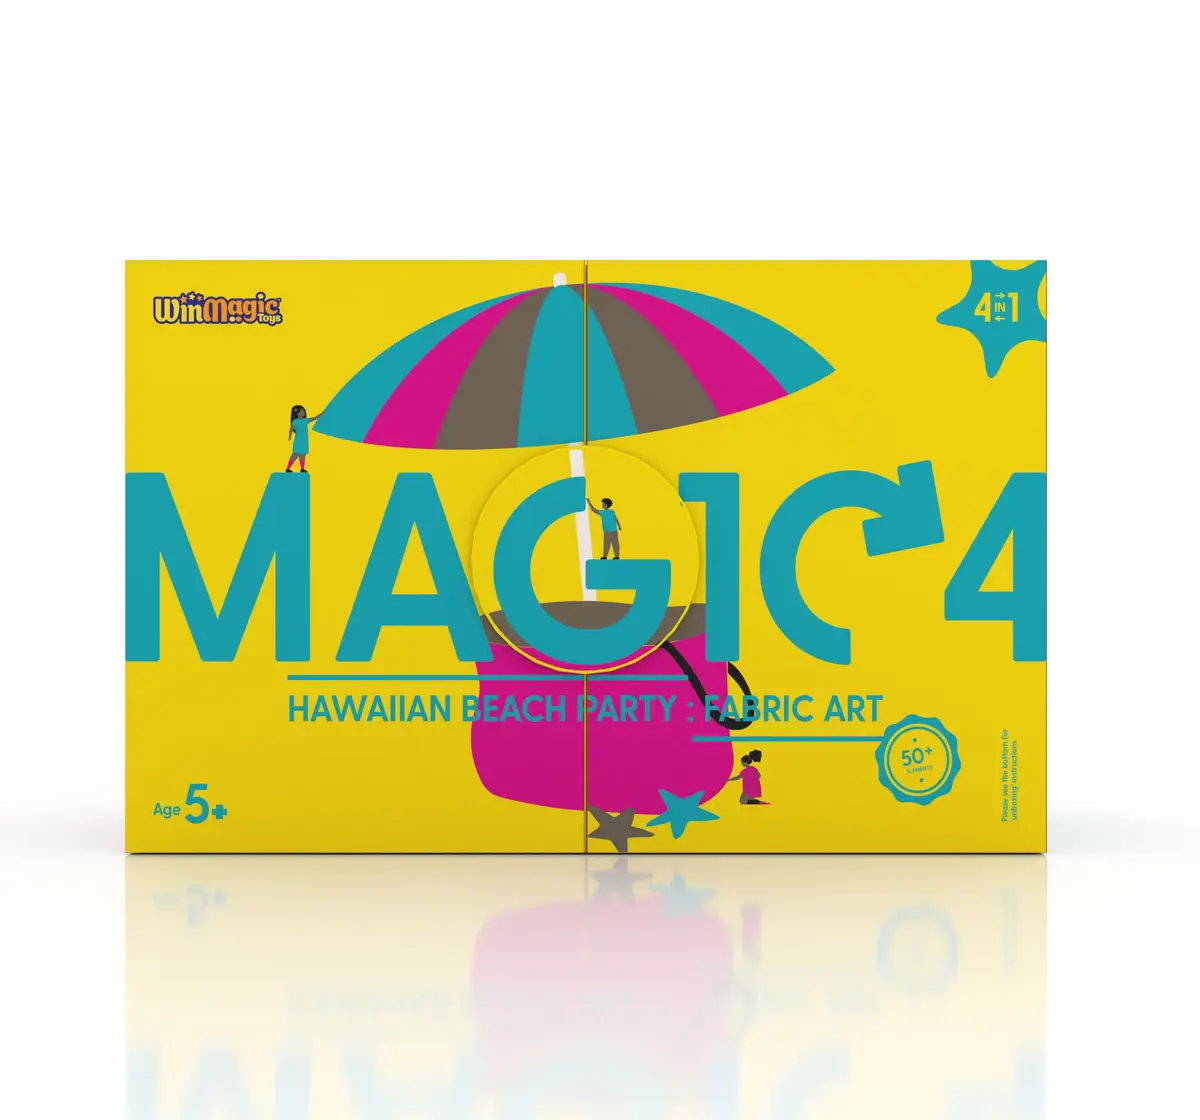 Magic4 Art Hawaiian Beach Party, for Girls 5 Years and Above